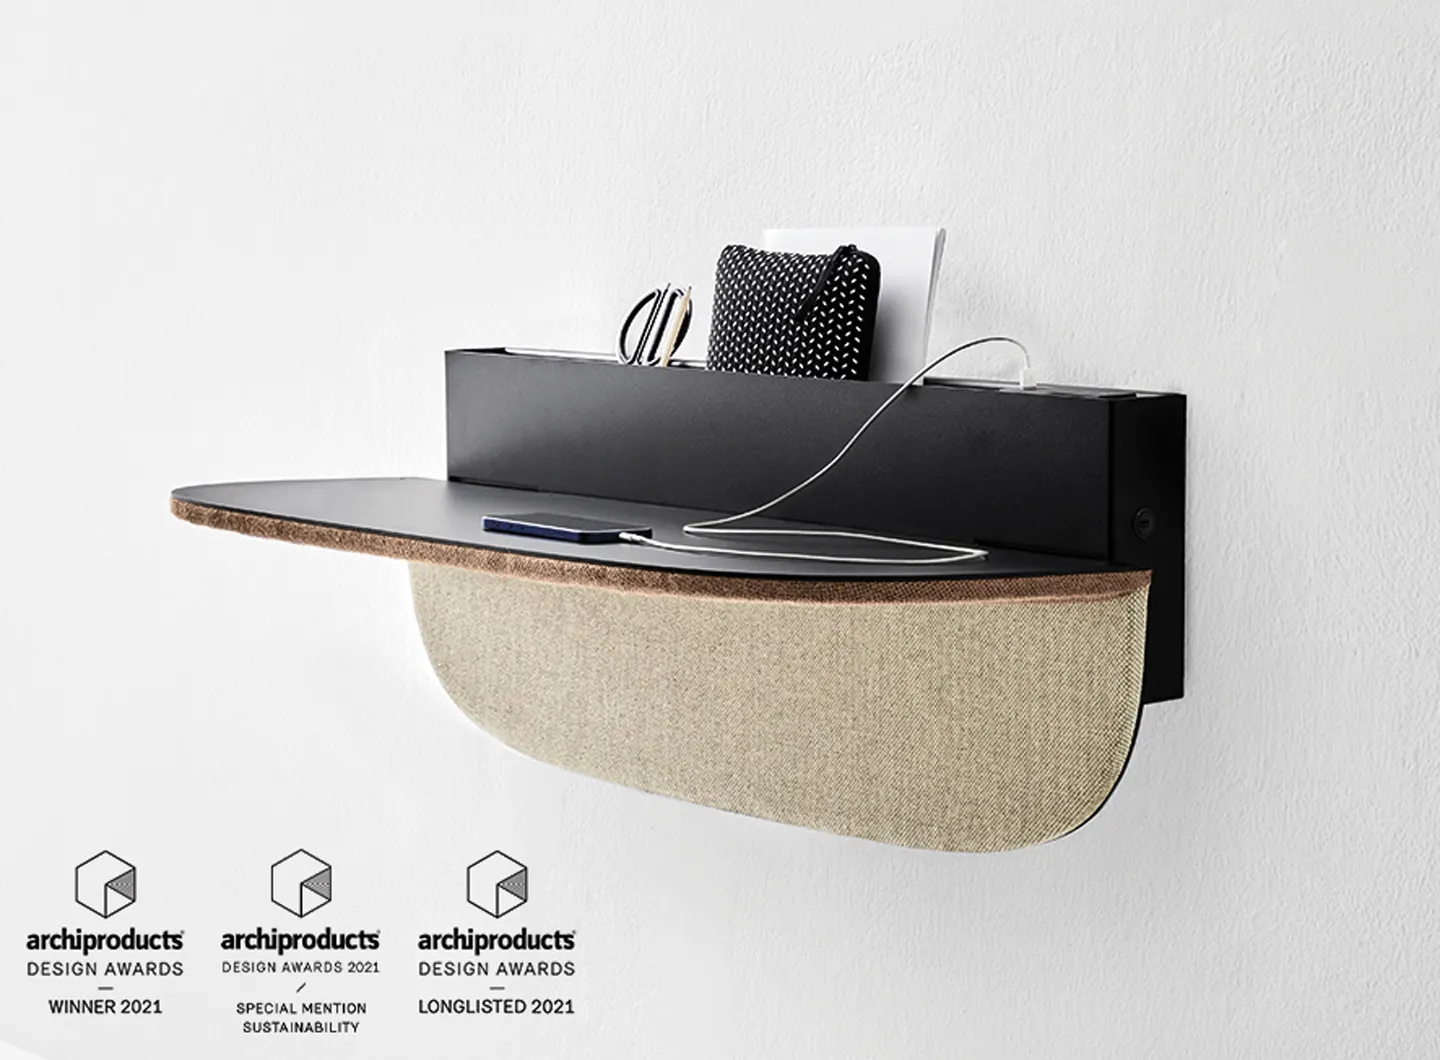 archiproducts winner 2021 dune